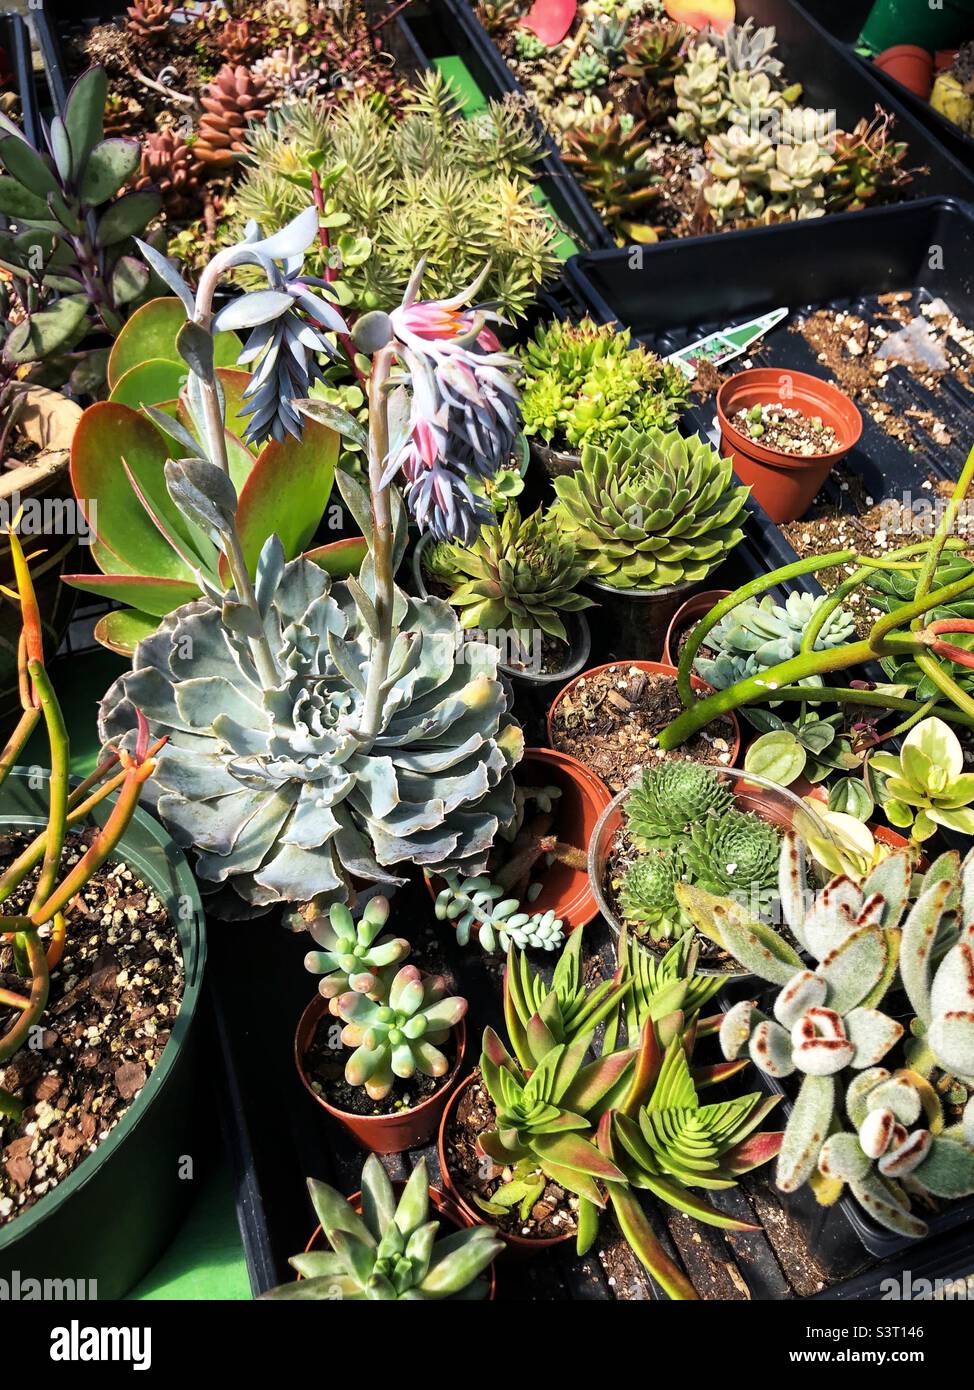 Bunch of succulent plants from the garden center Stock Photo